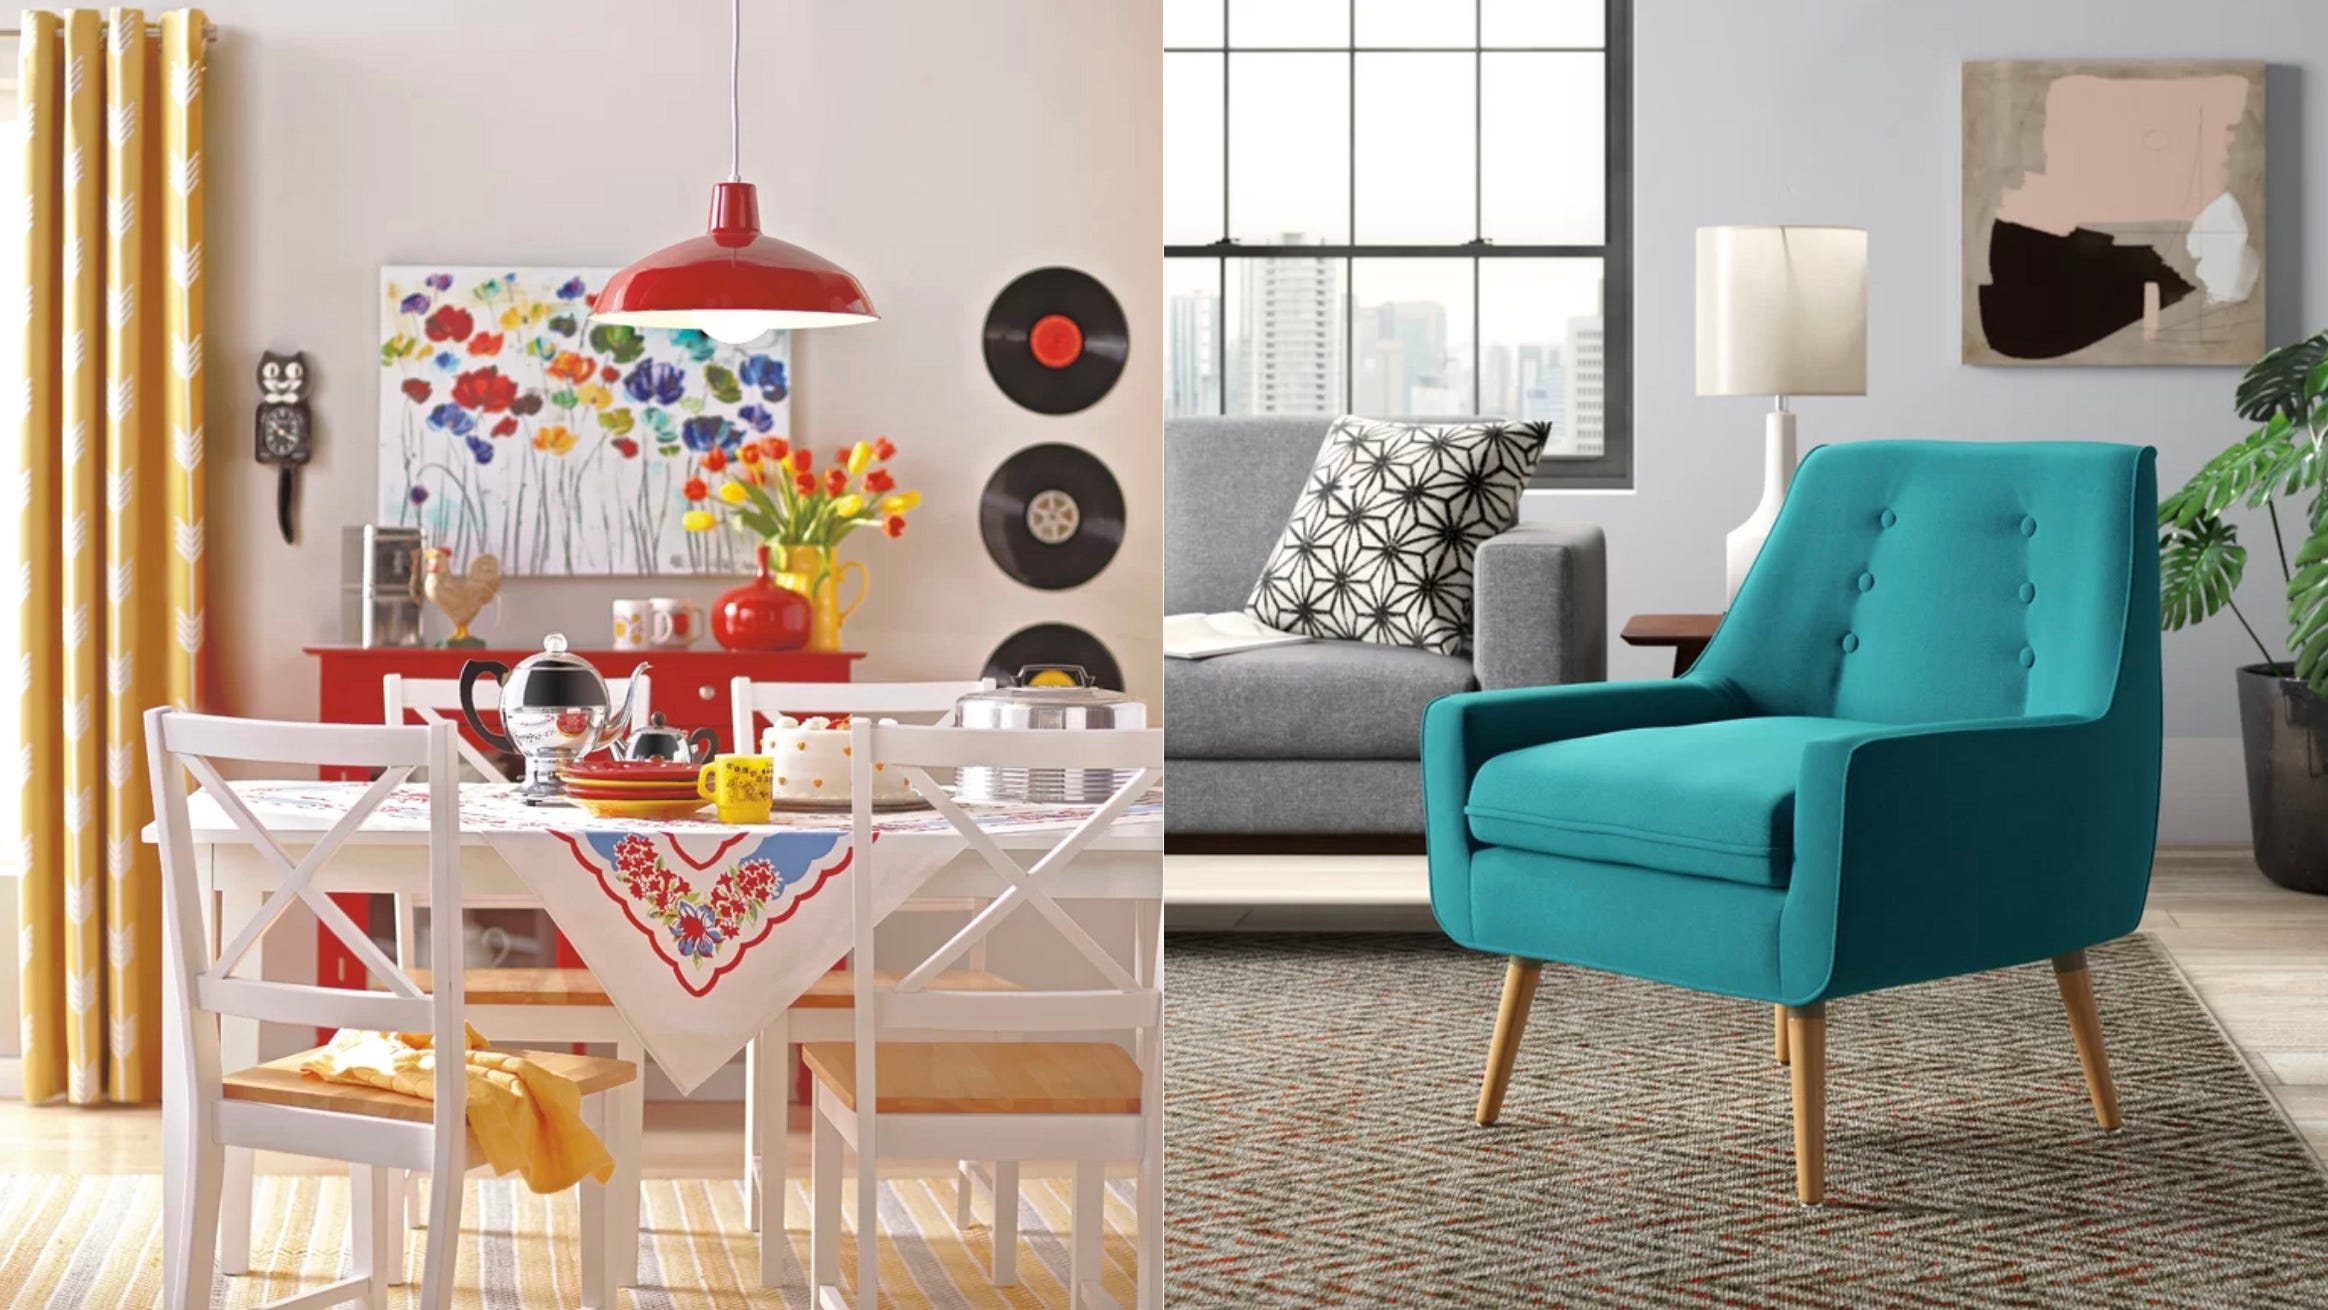 This Wayfair Clearance Sale Is A Great Chance To Get Furniture For Less